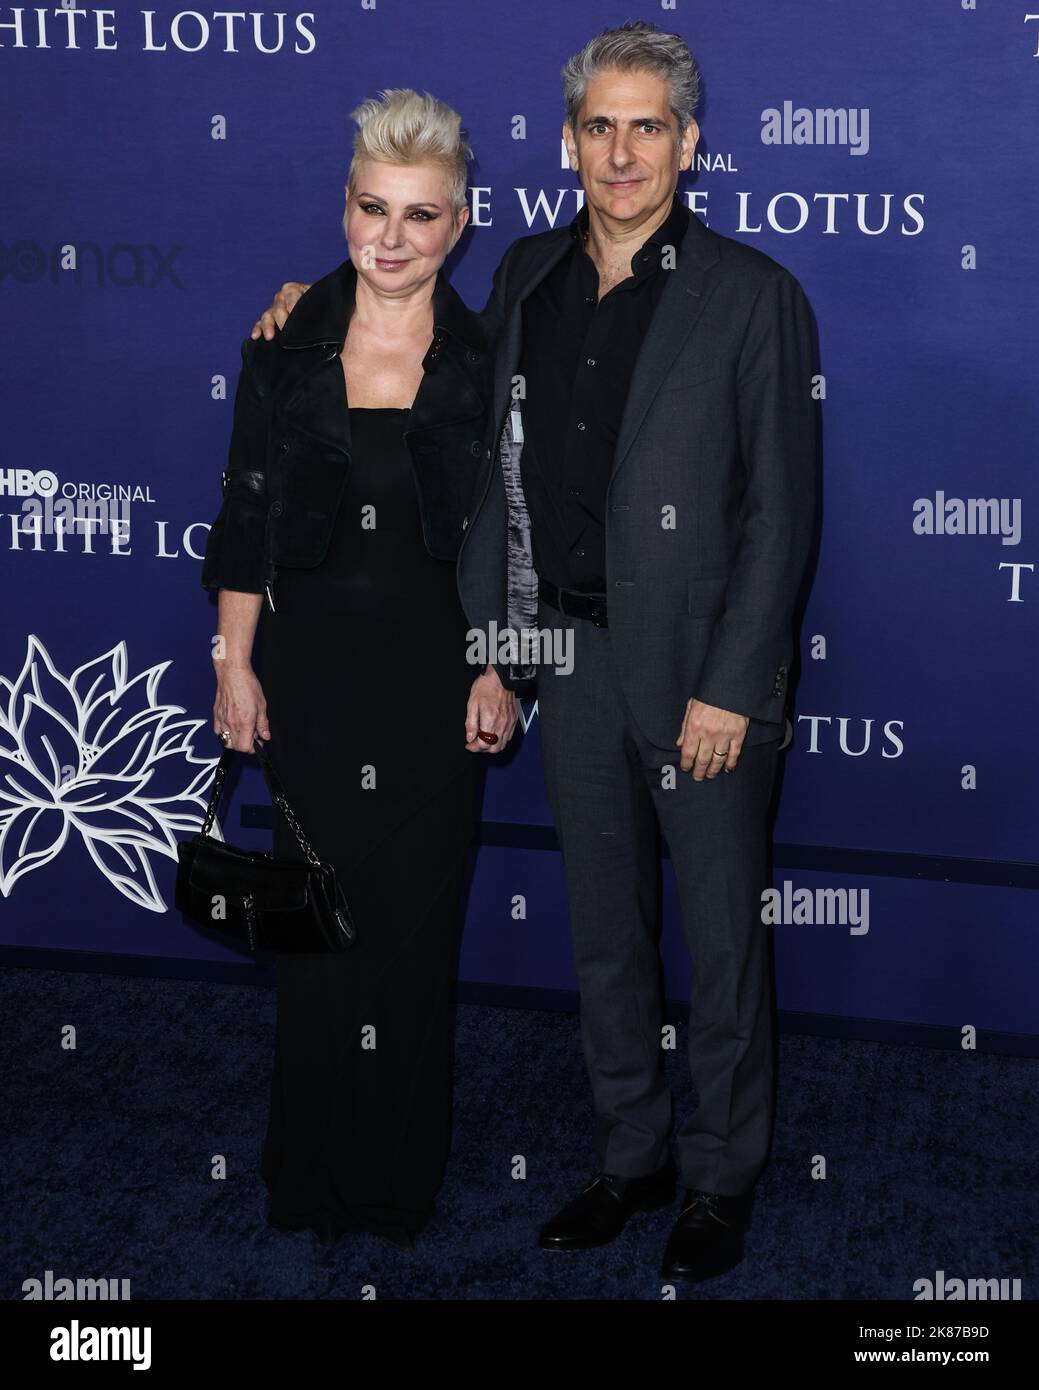 Hollywood, USA. 20th Oct, 2022. HOLLYWOOD, LOS ANGELES, CALIFORNIA, USA - OCTOBER 20: Victoria Imperioli and Michael Imperioli arrive at the Los Angeles Premiere Of HBO's Original Series 'The White Lotus' Season 2 held at Goya Studios on October 20, 2022 in Hollywood, Los Angeles, California, USA. (Photo by David Acosta/Image Press Agency) Credit: Image Press Agency/Alamy Live News Stock Photo